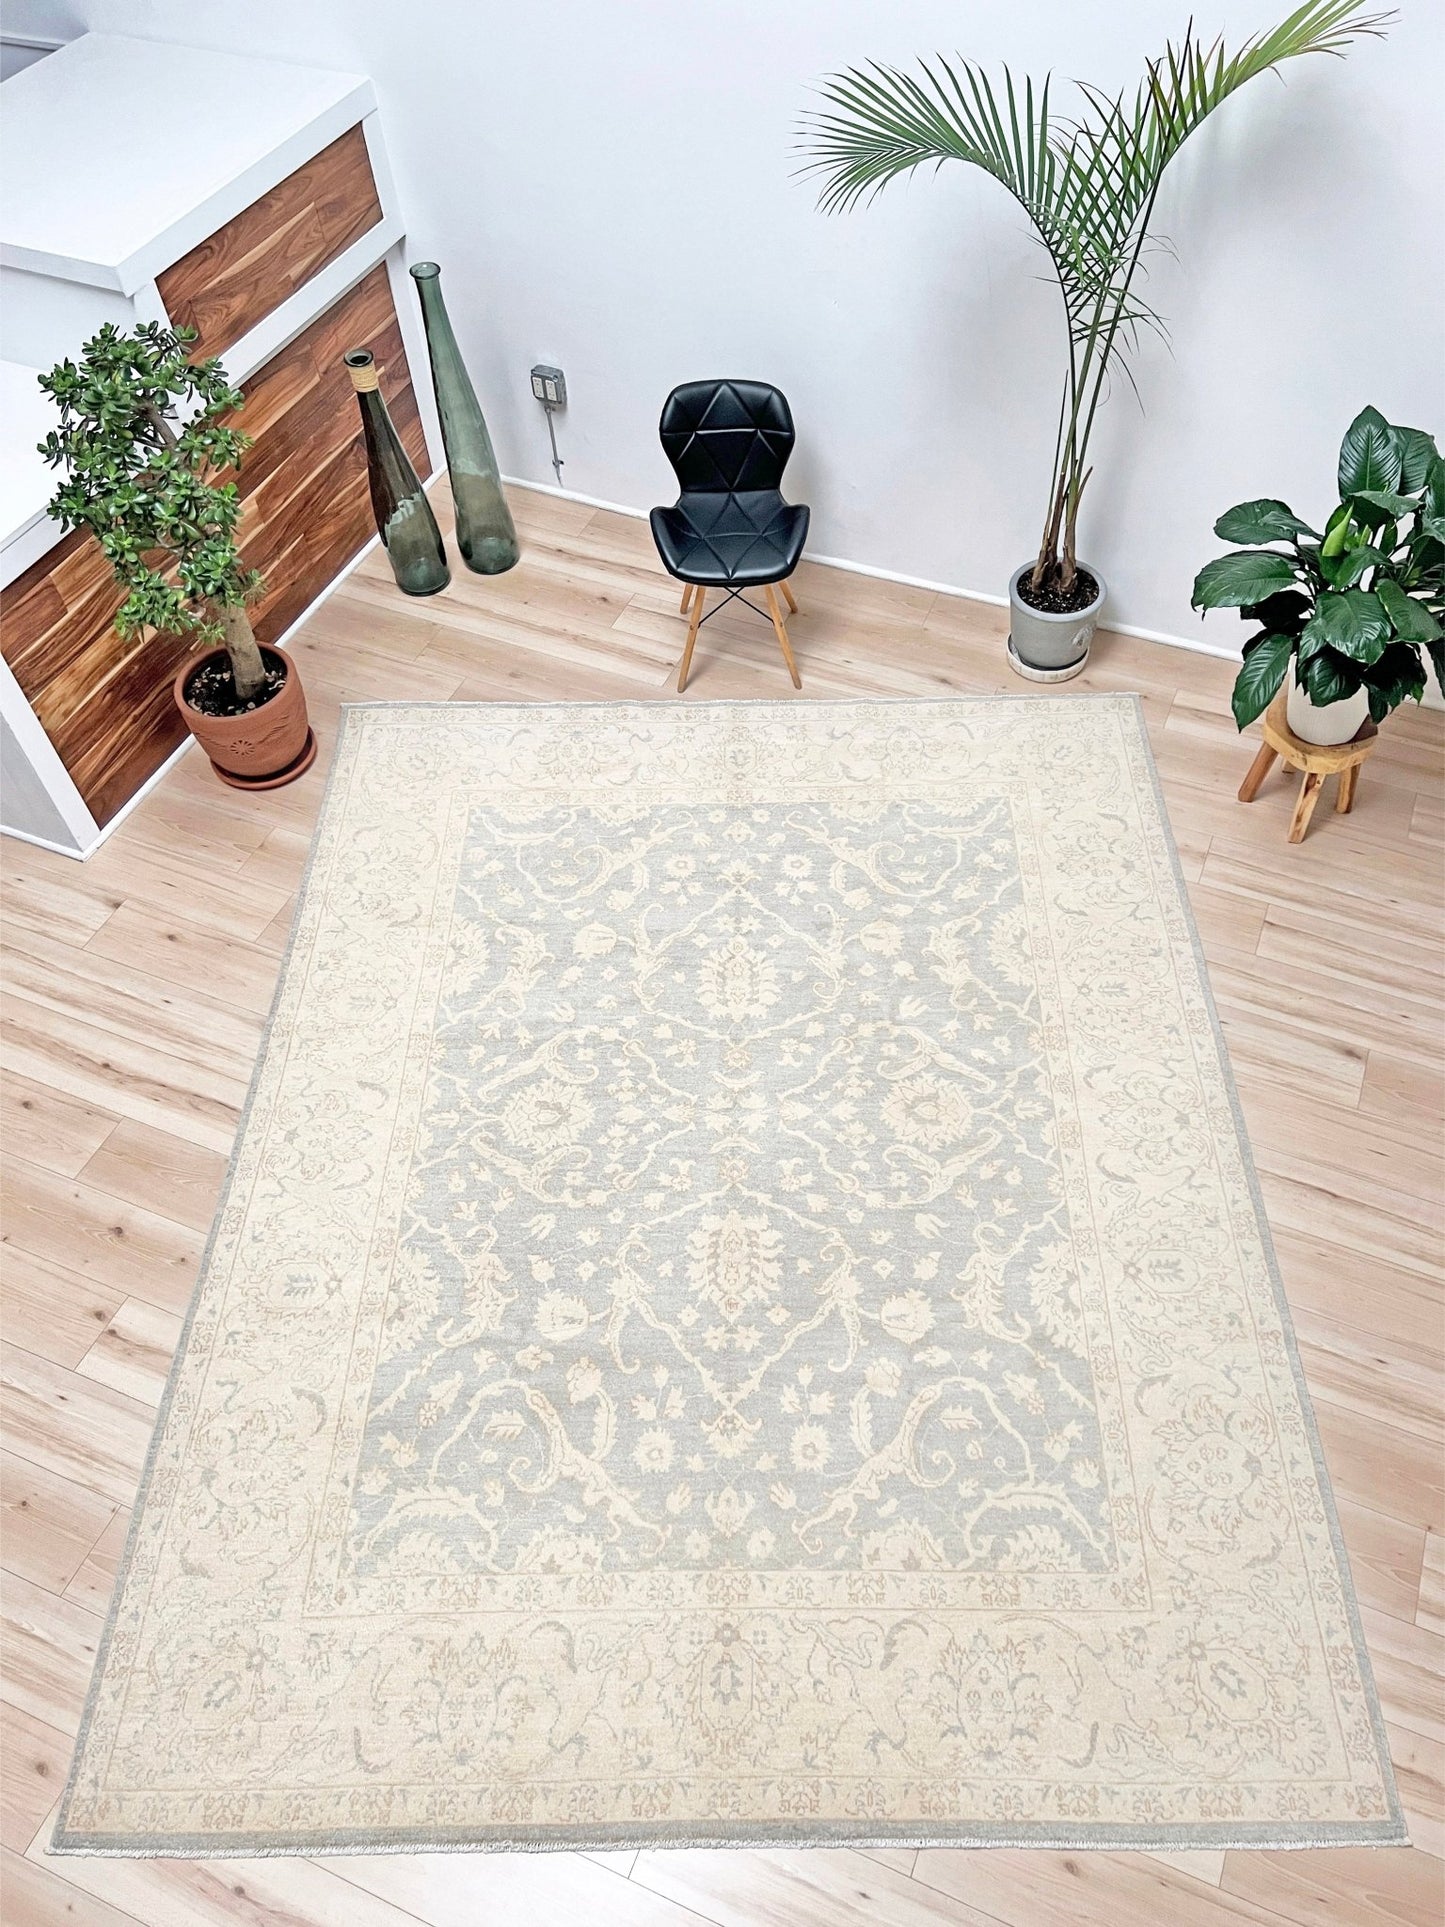 Oushak 8x6 handmade wool oriental rug shop san francisco bay area. Buy exquisite quality rug online Free shipping USA Canada.